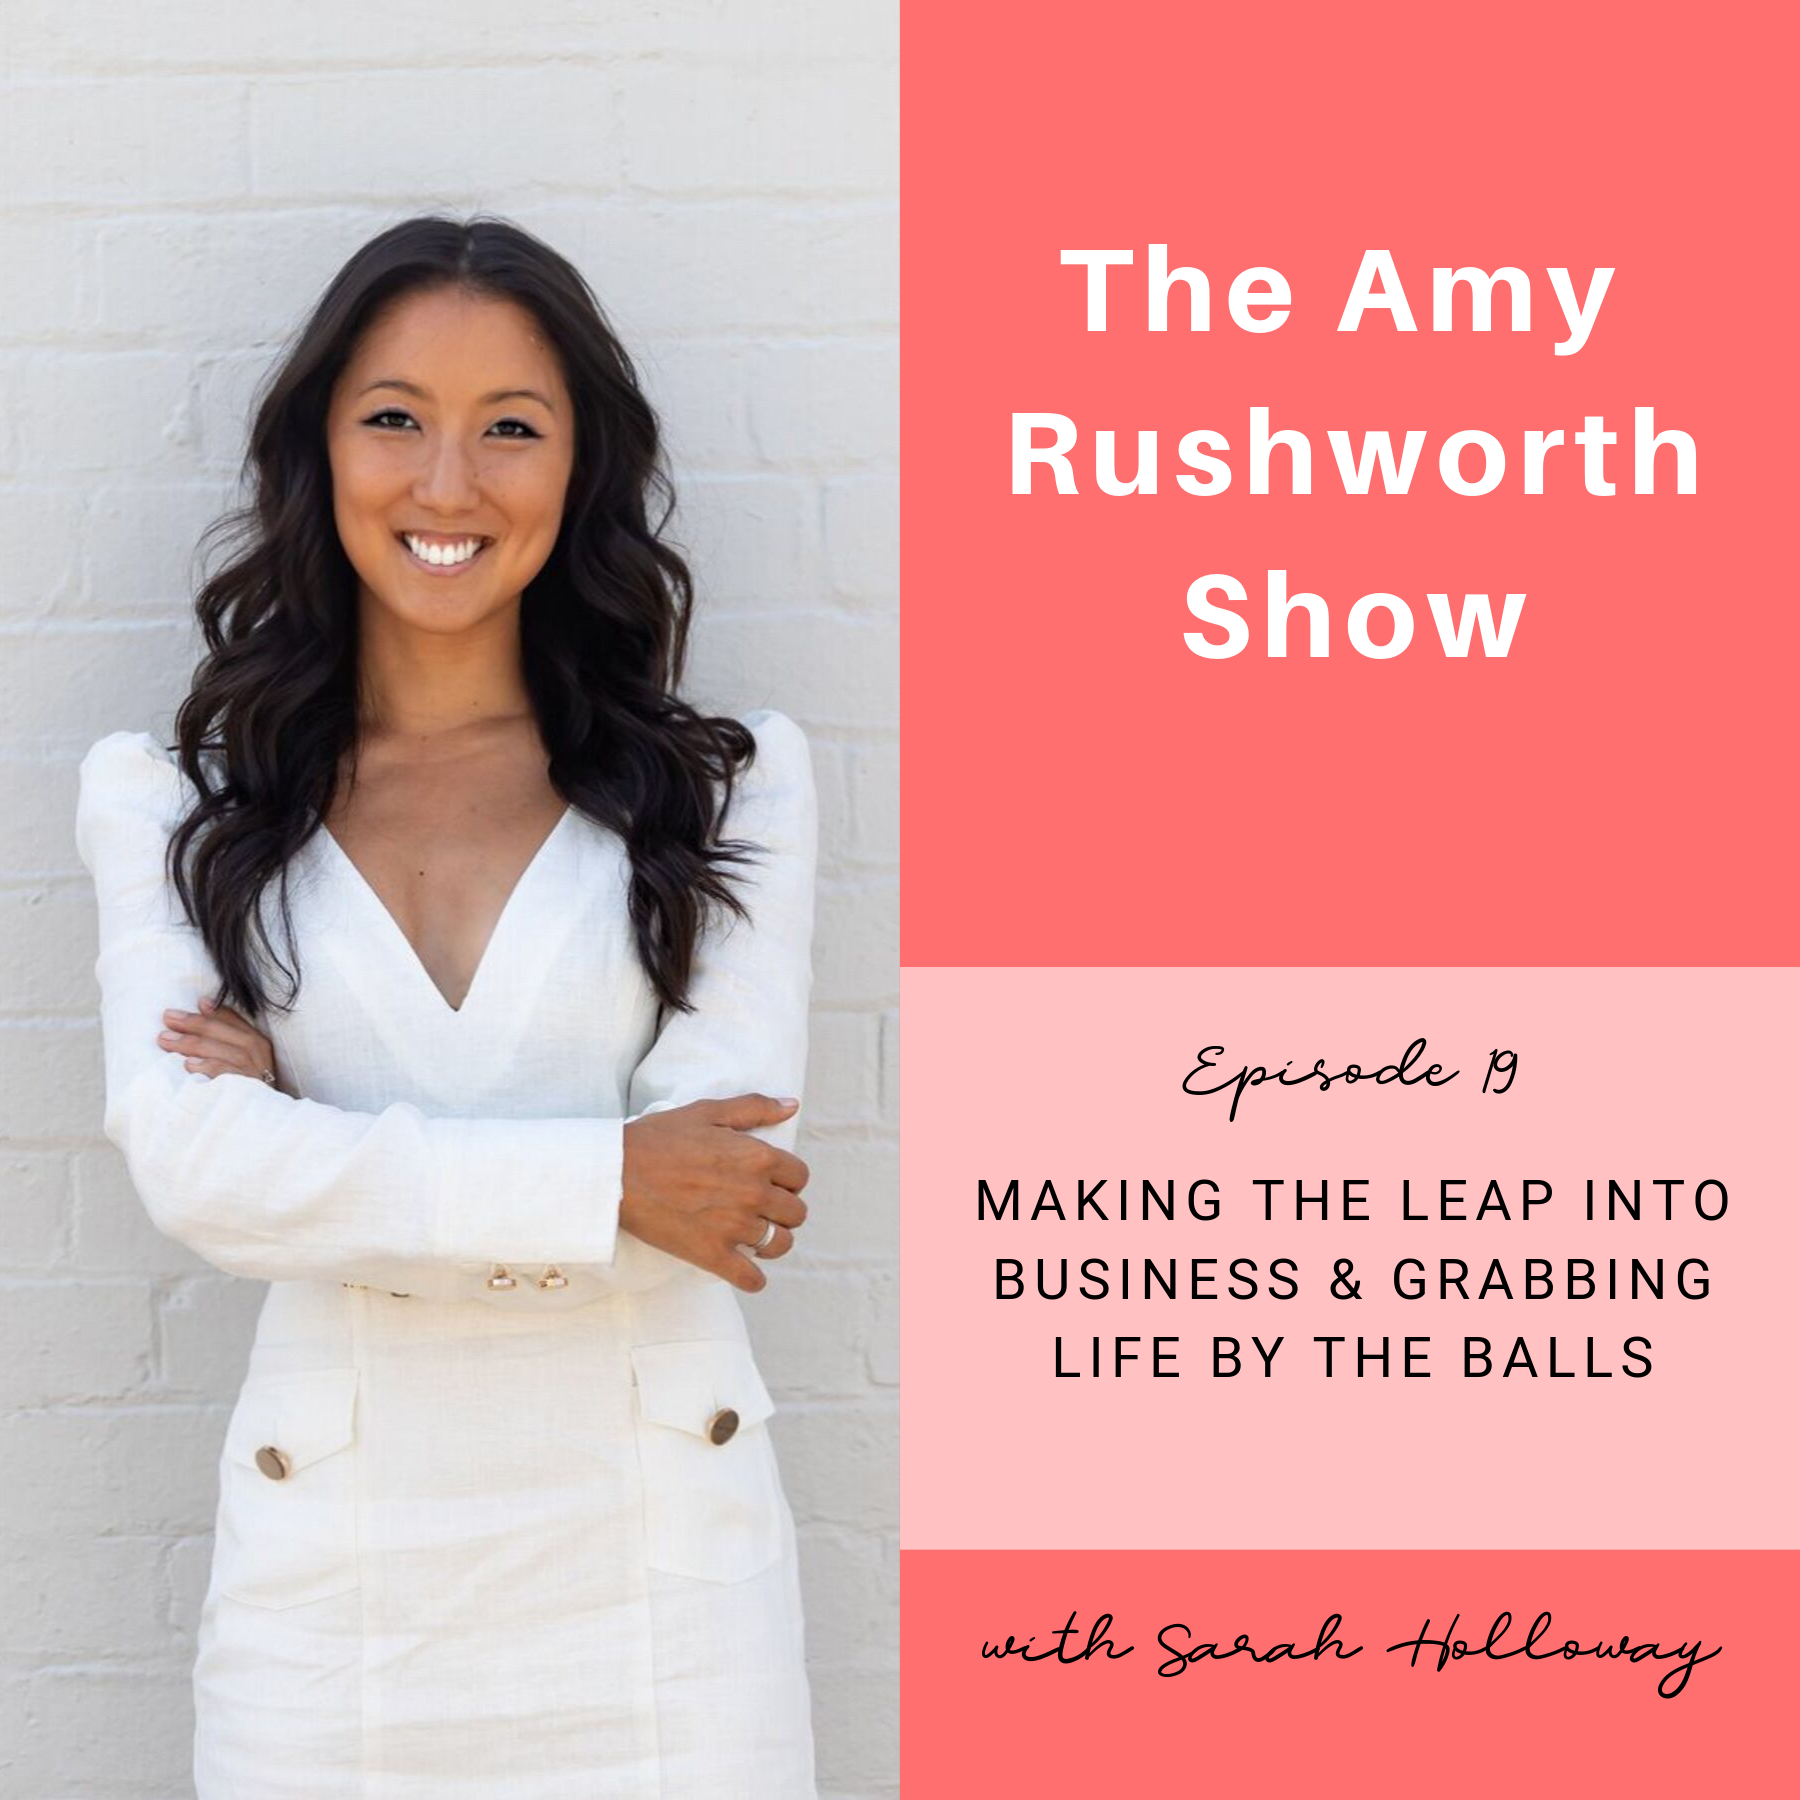 Episode 19: Making The Leap Into Business & Grabbing Life by The Balls